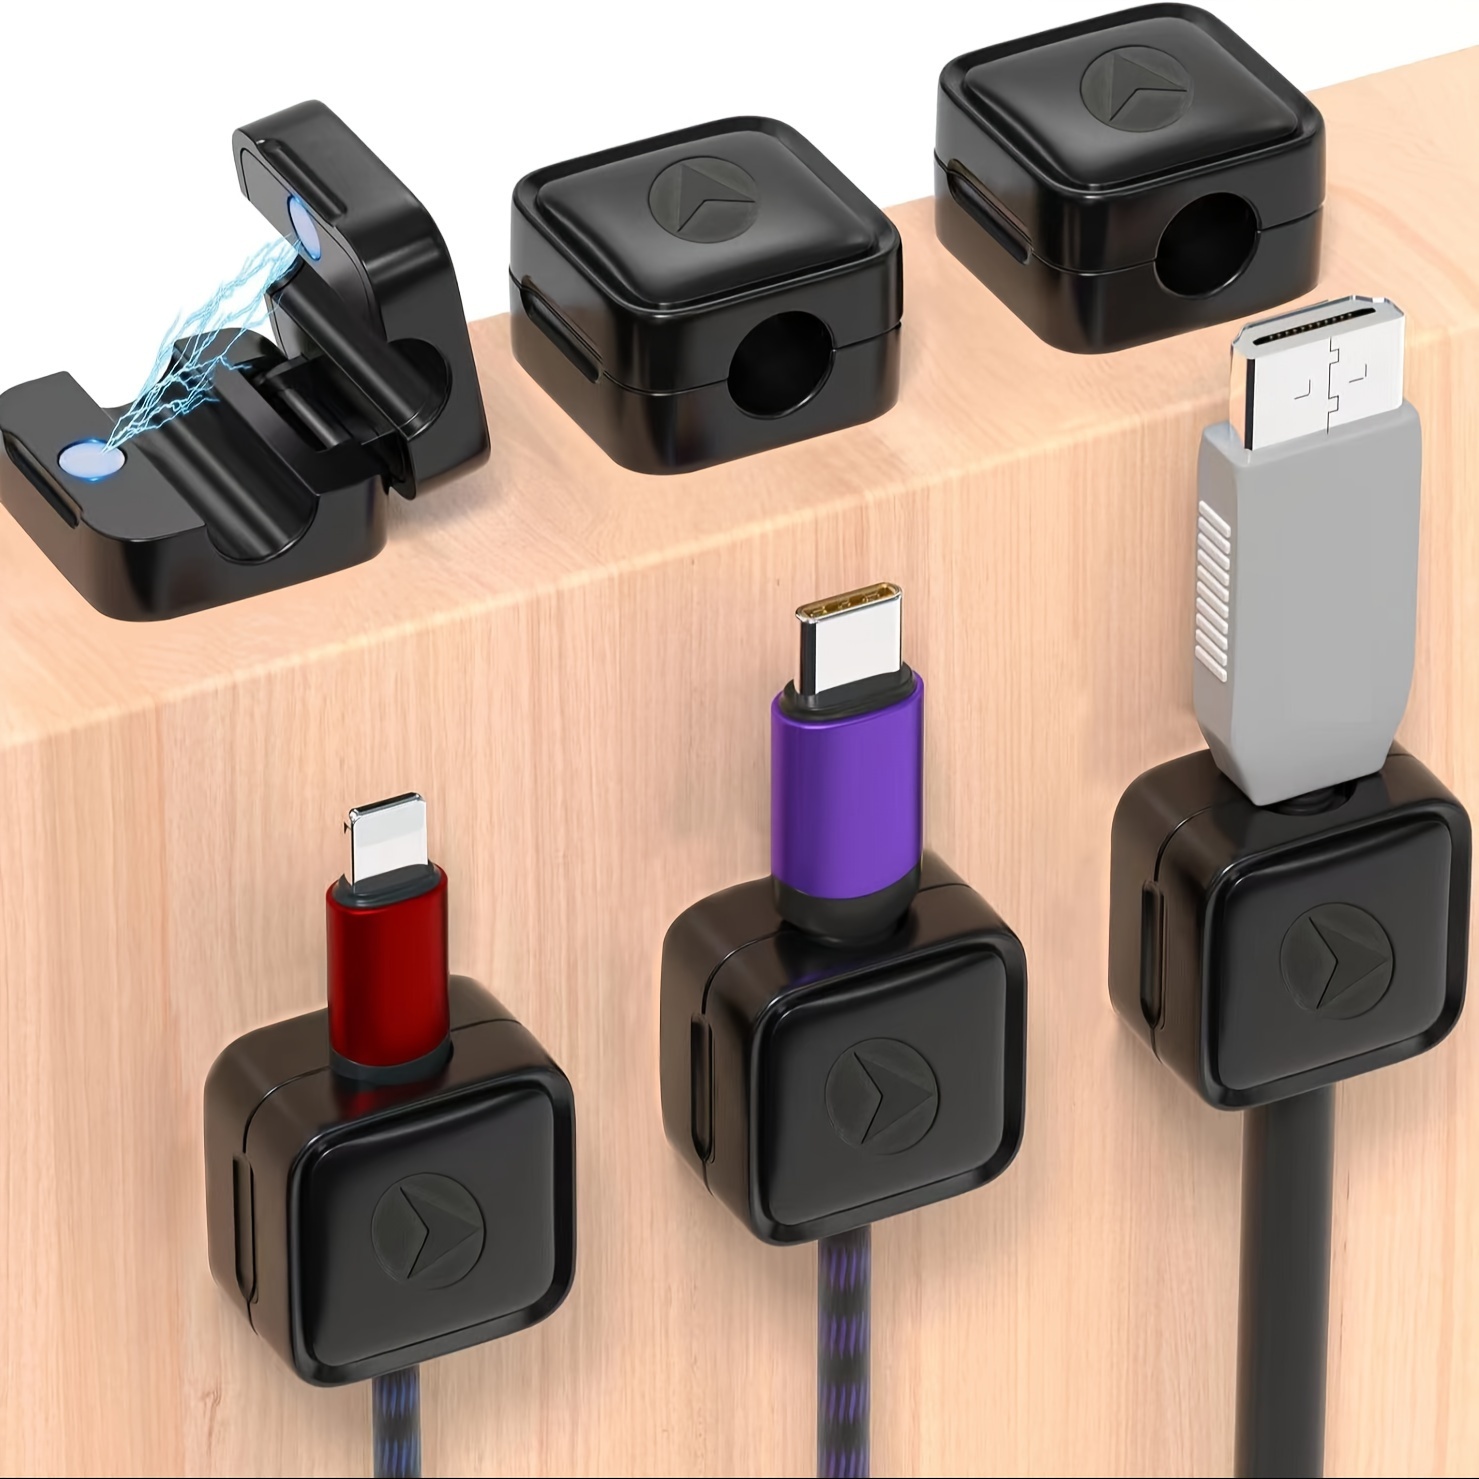 

Magnetic Cable Clips With Cable Smooth Adjustable Cord Holder, Under Desk Cable Management, Wire Holder Keeper Organizer For Home Office Desk Phone Car Wall Desktop Nightstand